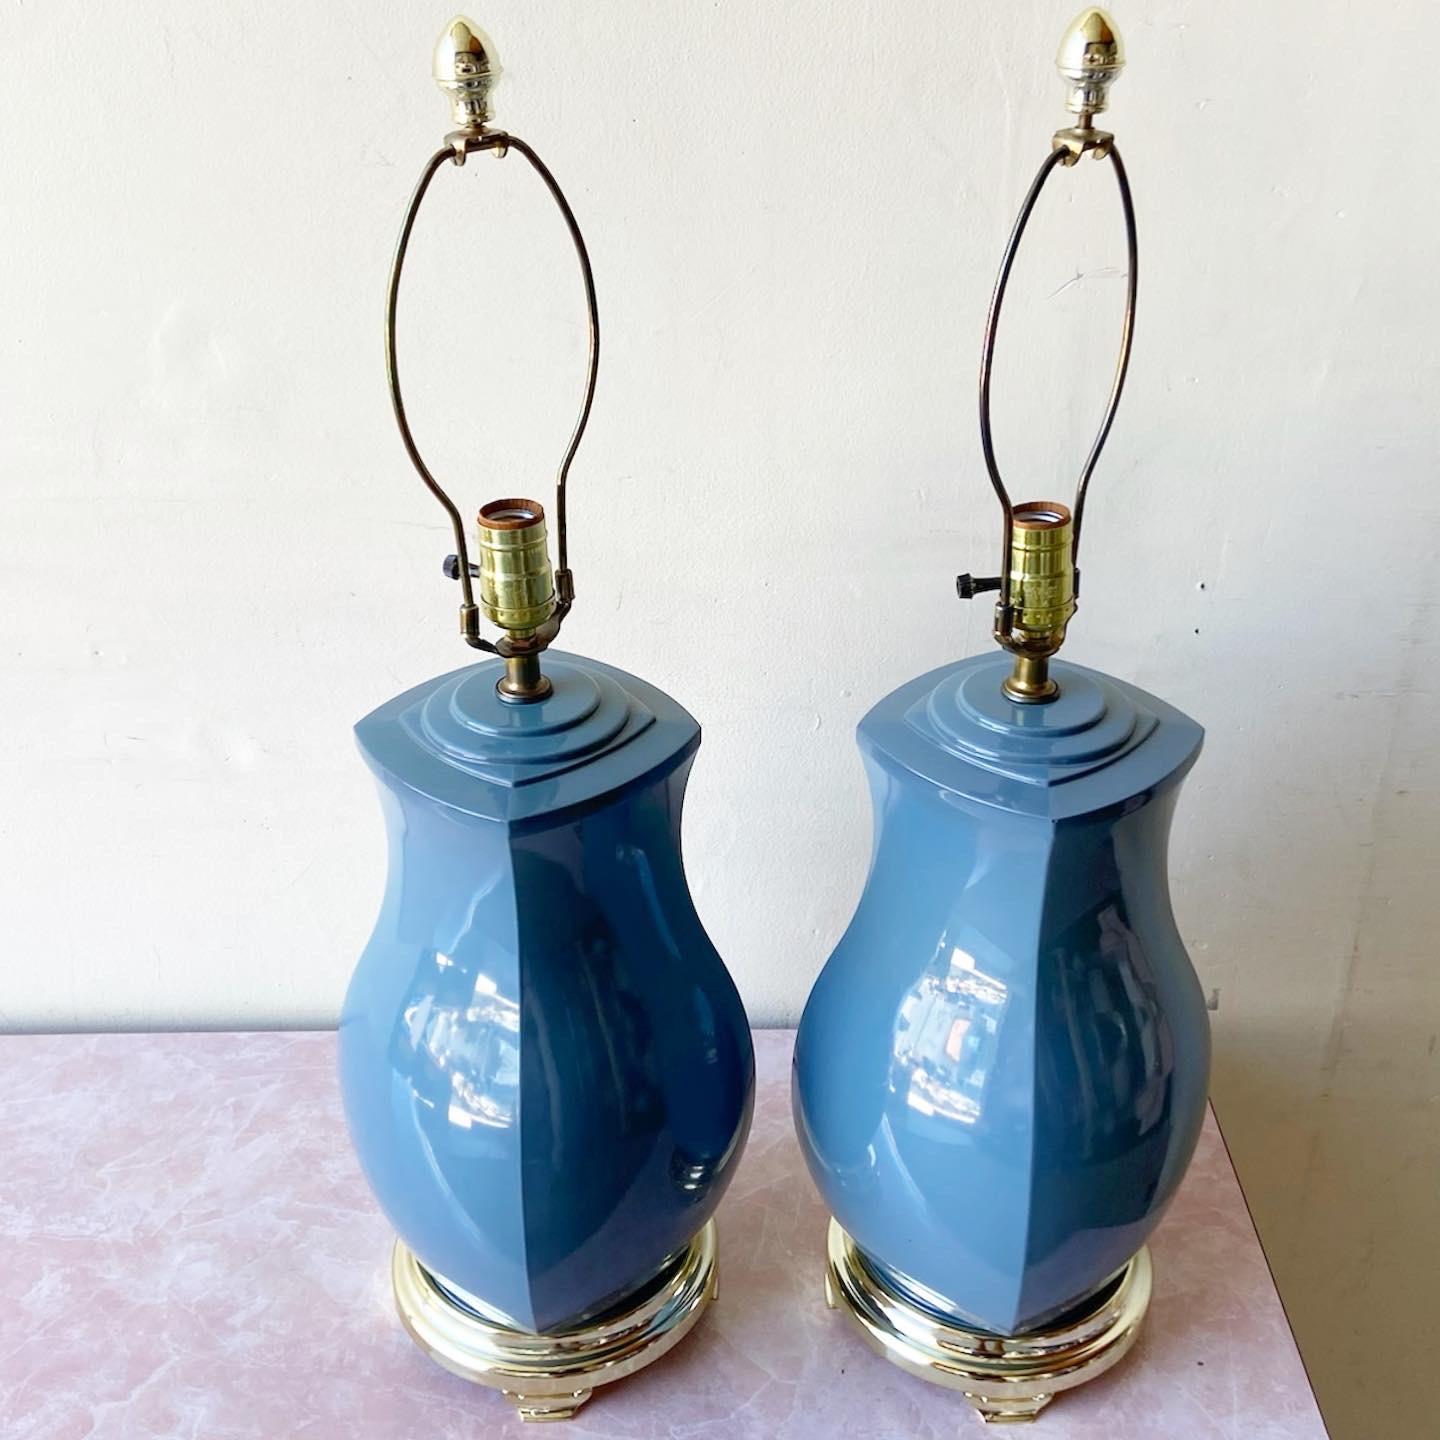 Post-Modern Postmodern Blue Porcelain Table Lamps With Gold Base - a Pair For Sale